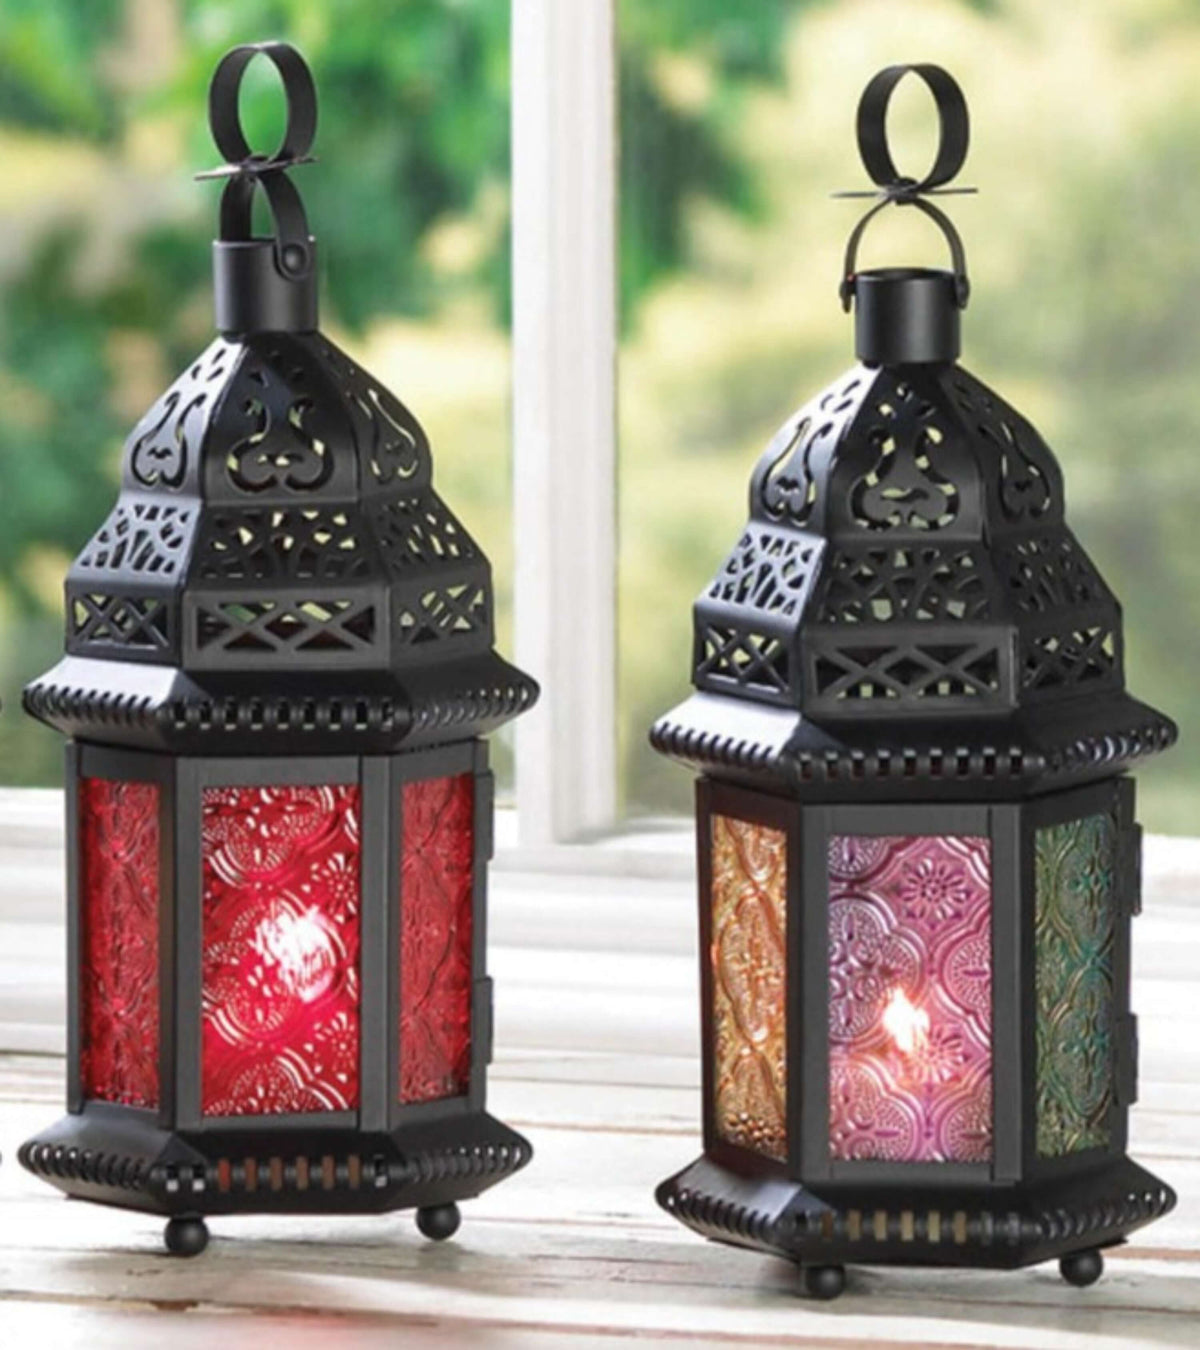 Rainbow and Red Glass Moroccan Lanterns